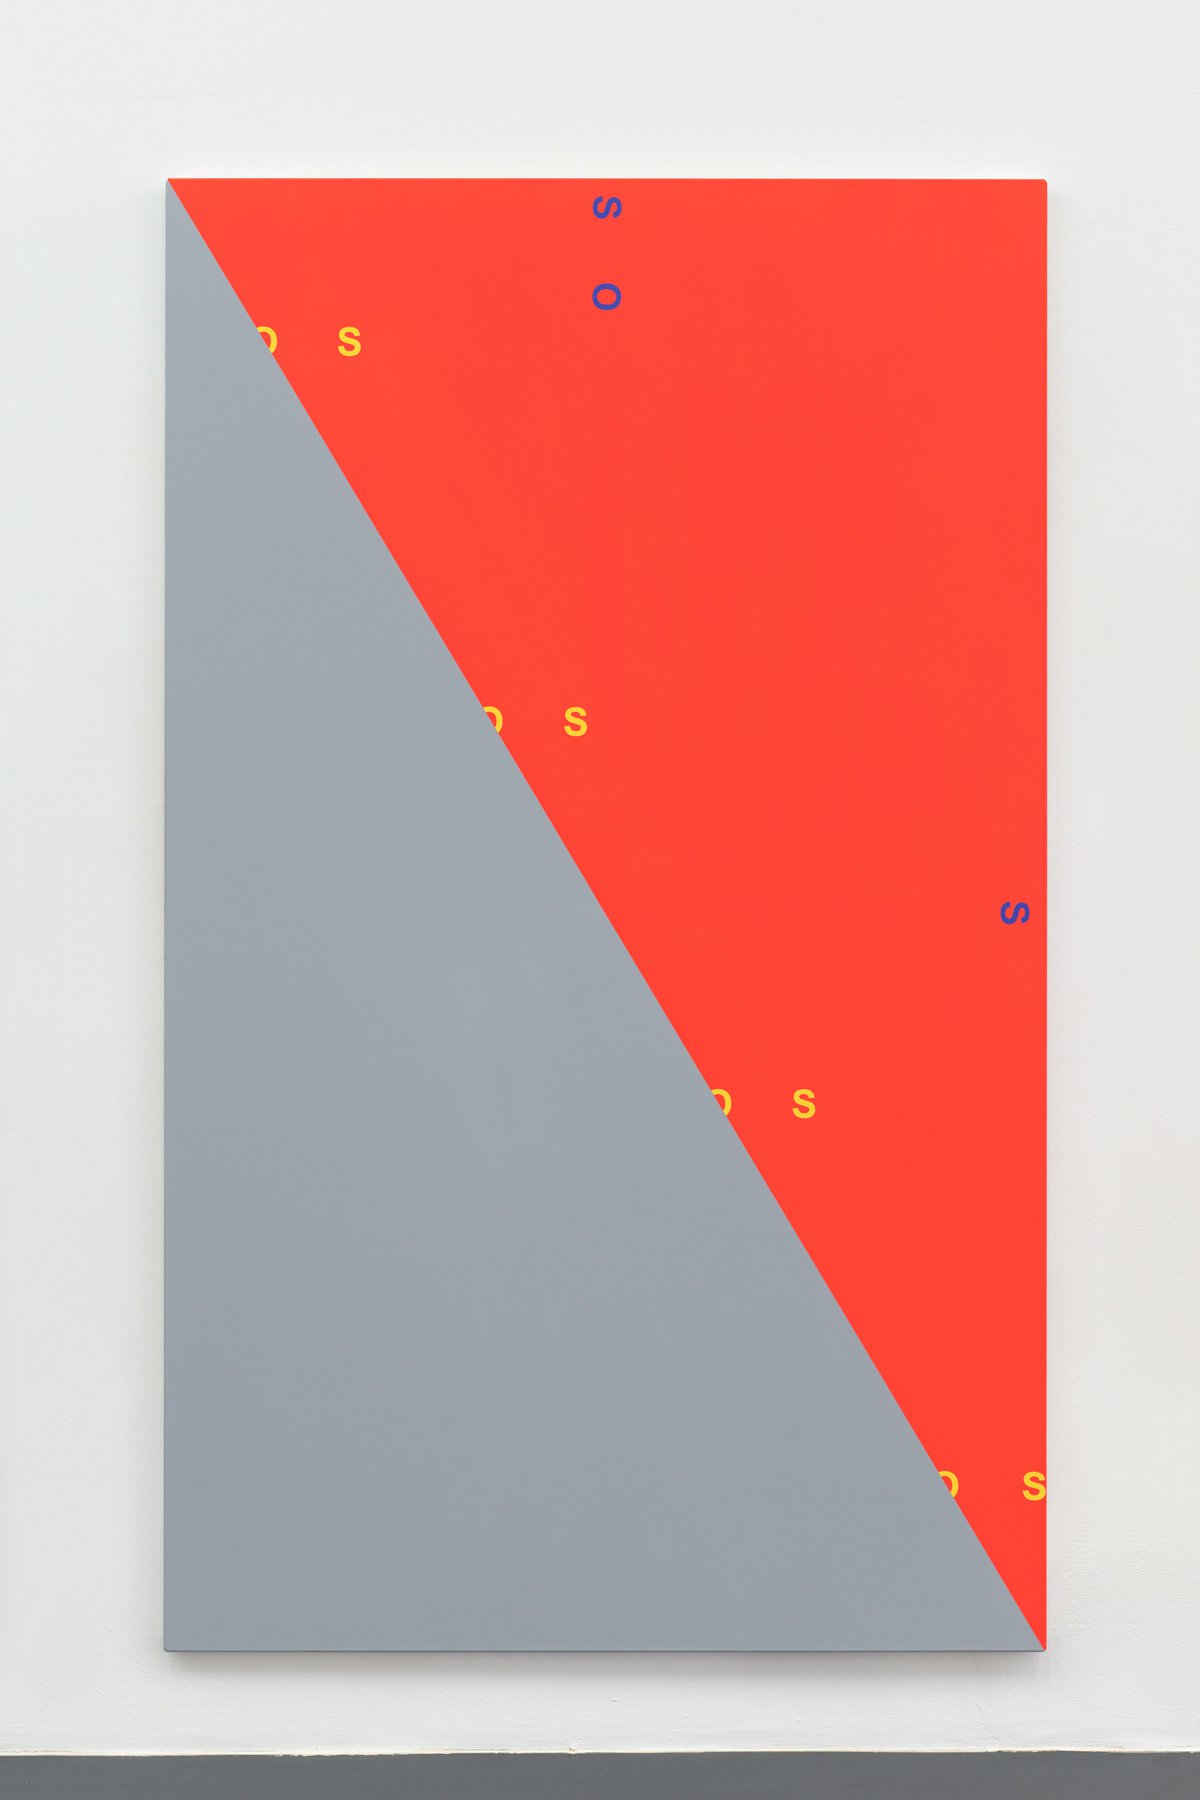 Nick OberthalerO.T. (OS-OS-OS-OS-SO-S), 2019Acrylic and gesso on cotton200 x 120 cm